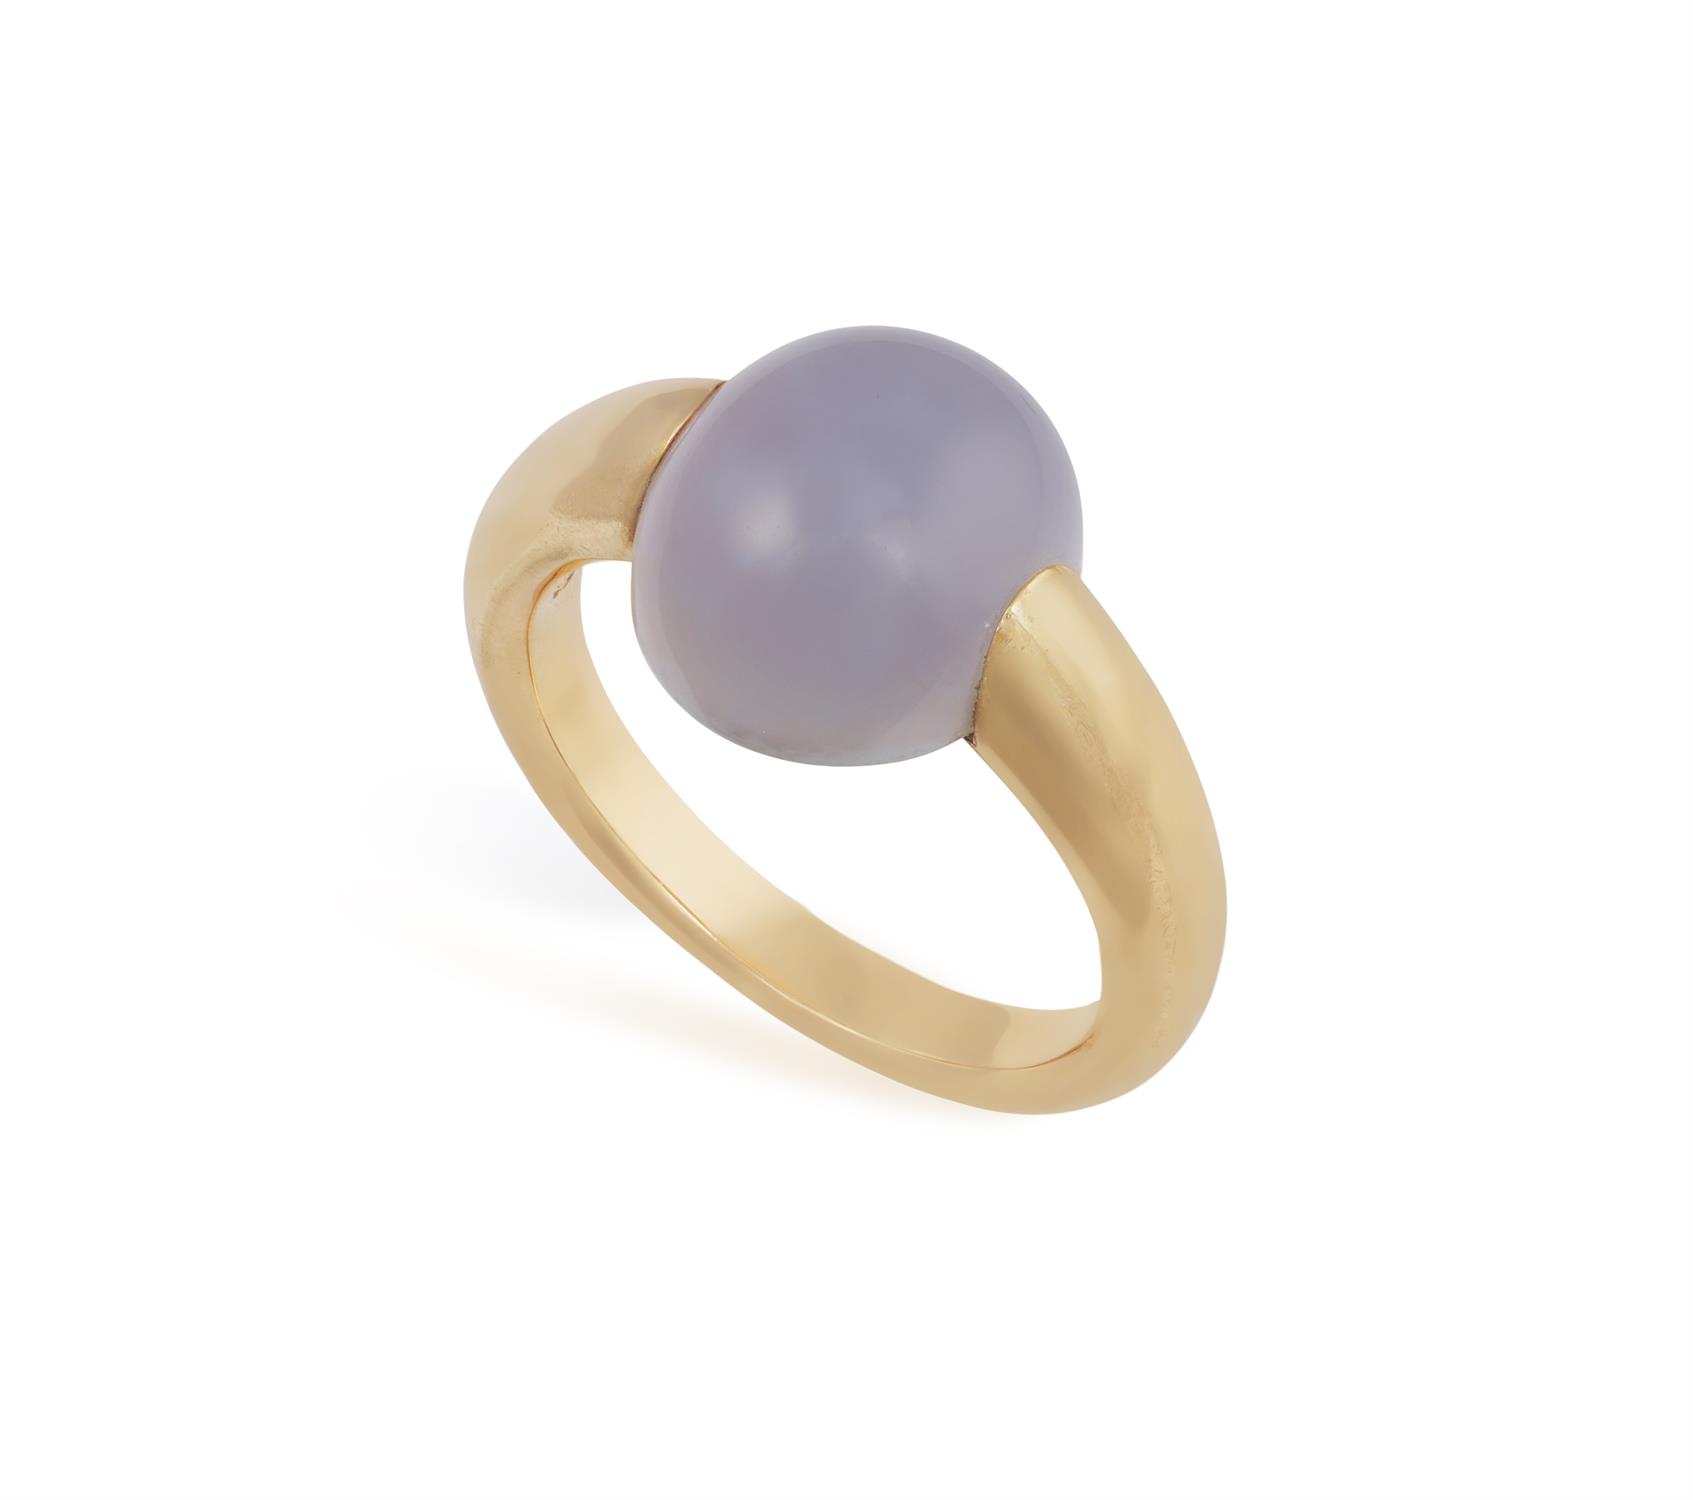 A CHALCEDONY 'M'AMA NON M'AMA' RING, BY POMELLATO Set with an oval-shaped lavender chalcedony